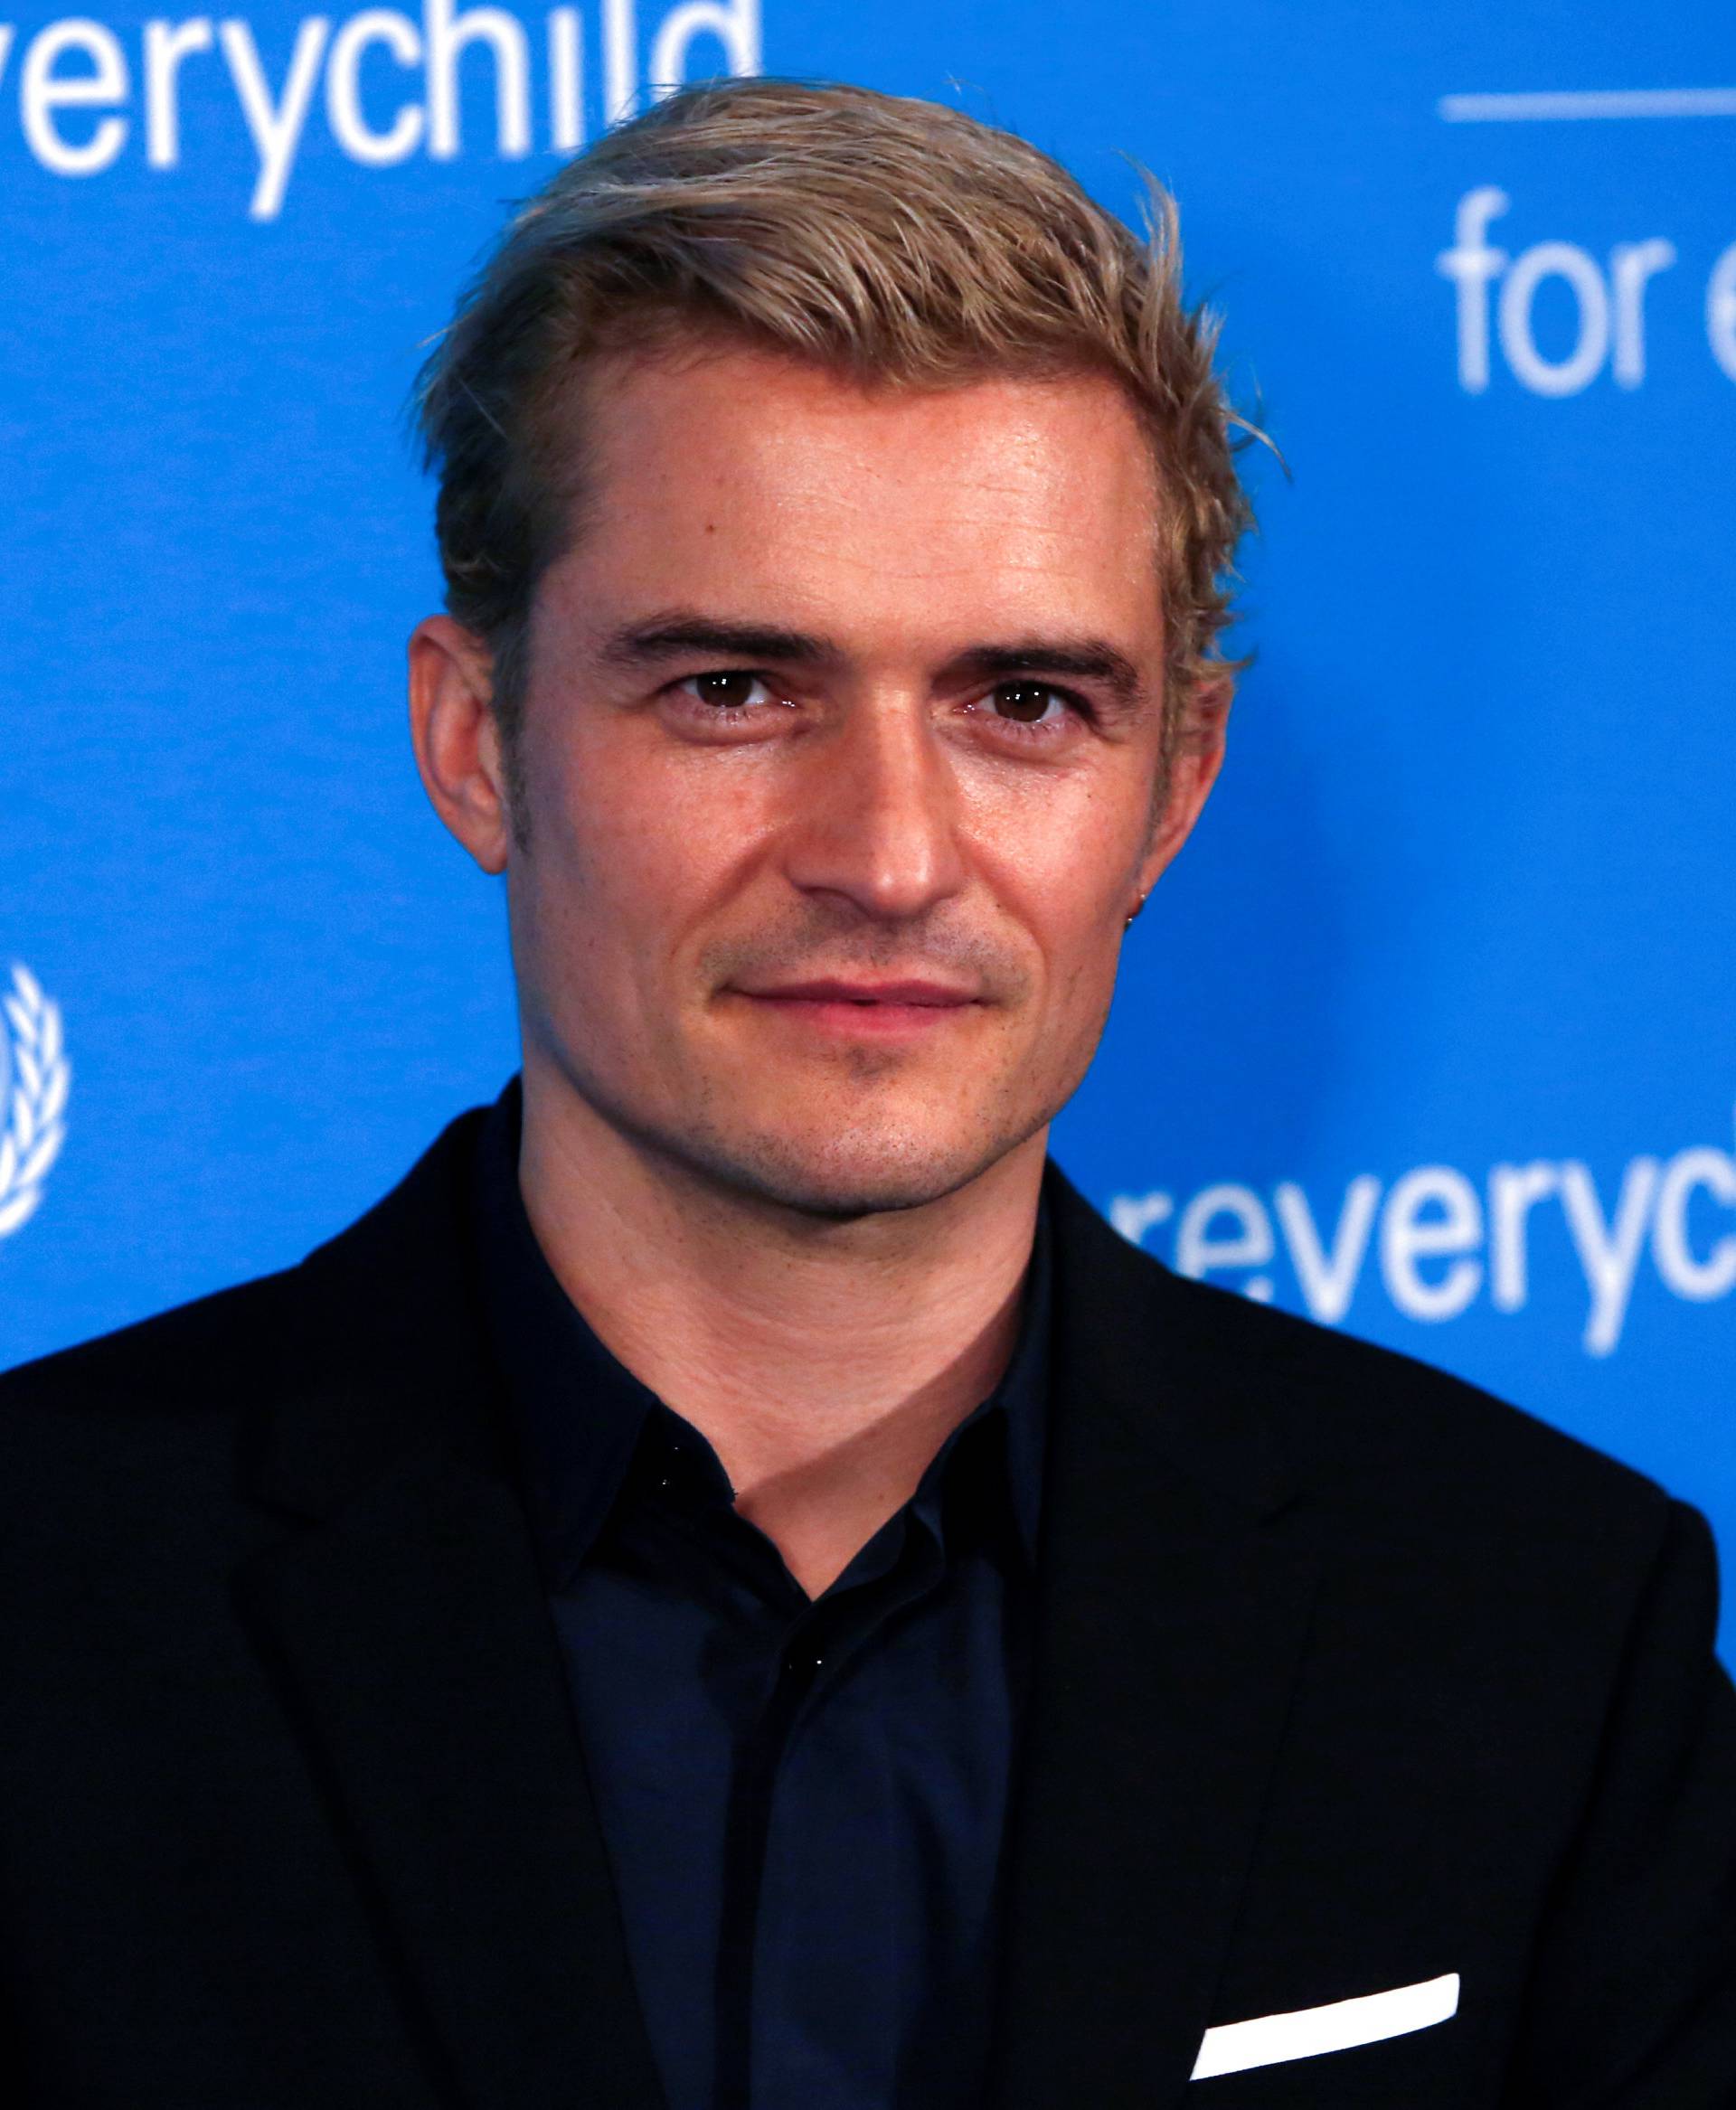 Actor Orlando Bloom attends the UNICEF 70th anniversary event at the United Nations Headquarters in Manhattan, New York City, U.S.